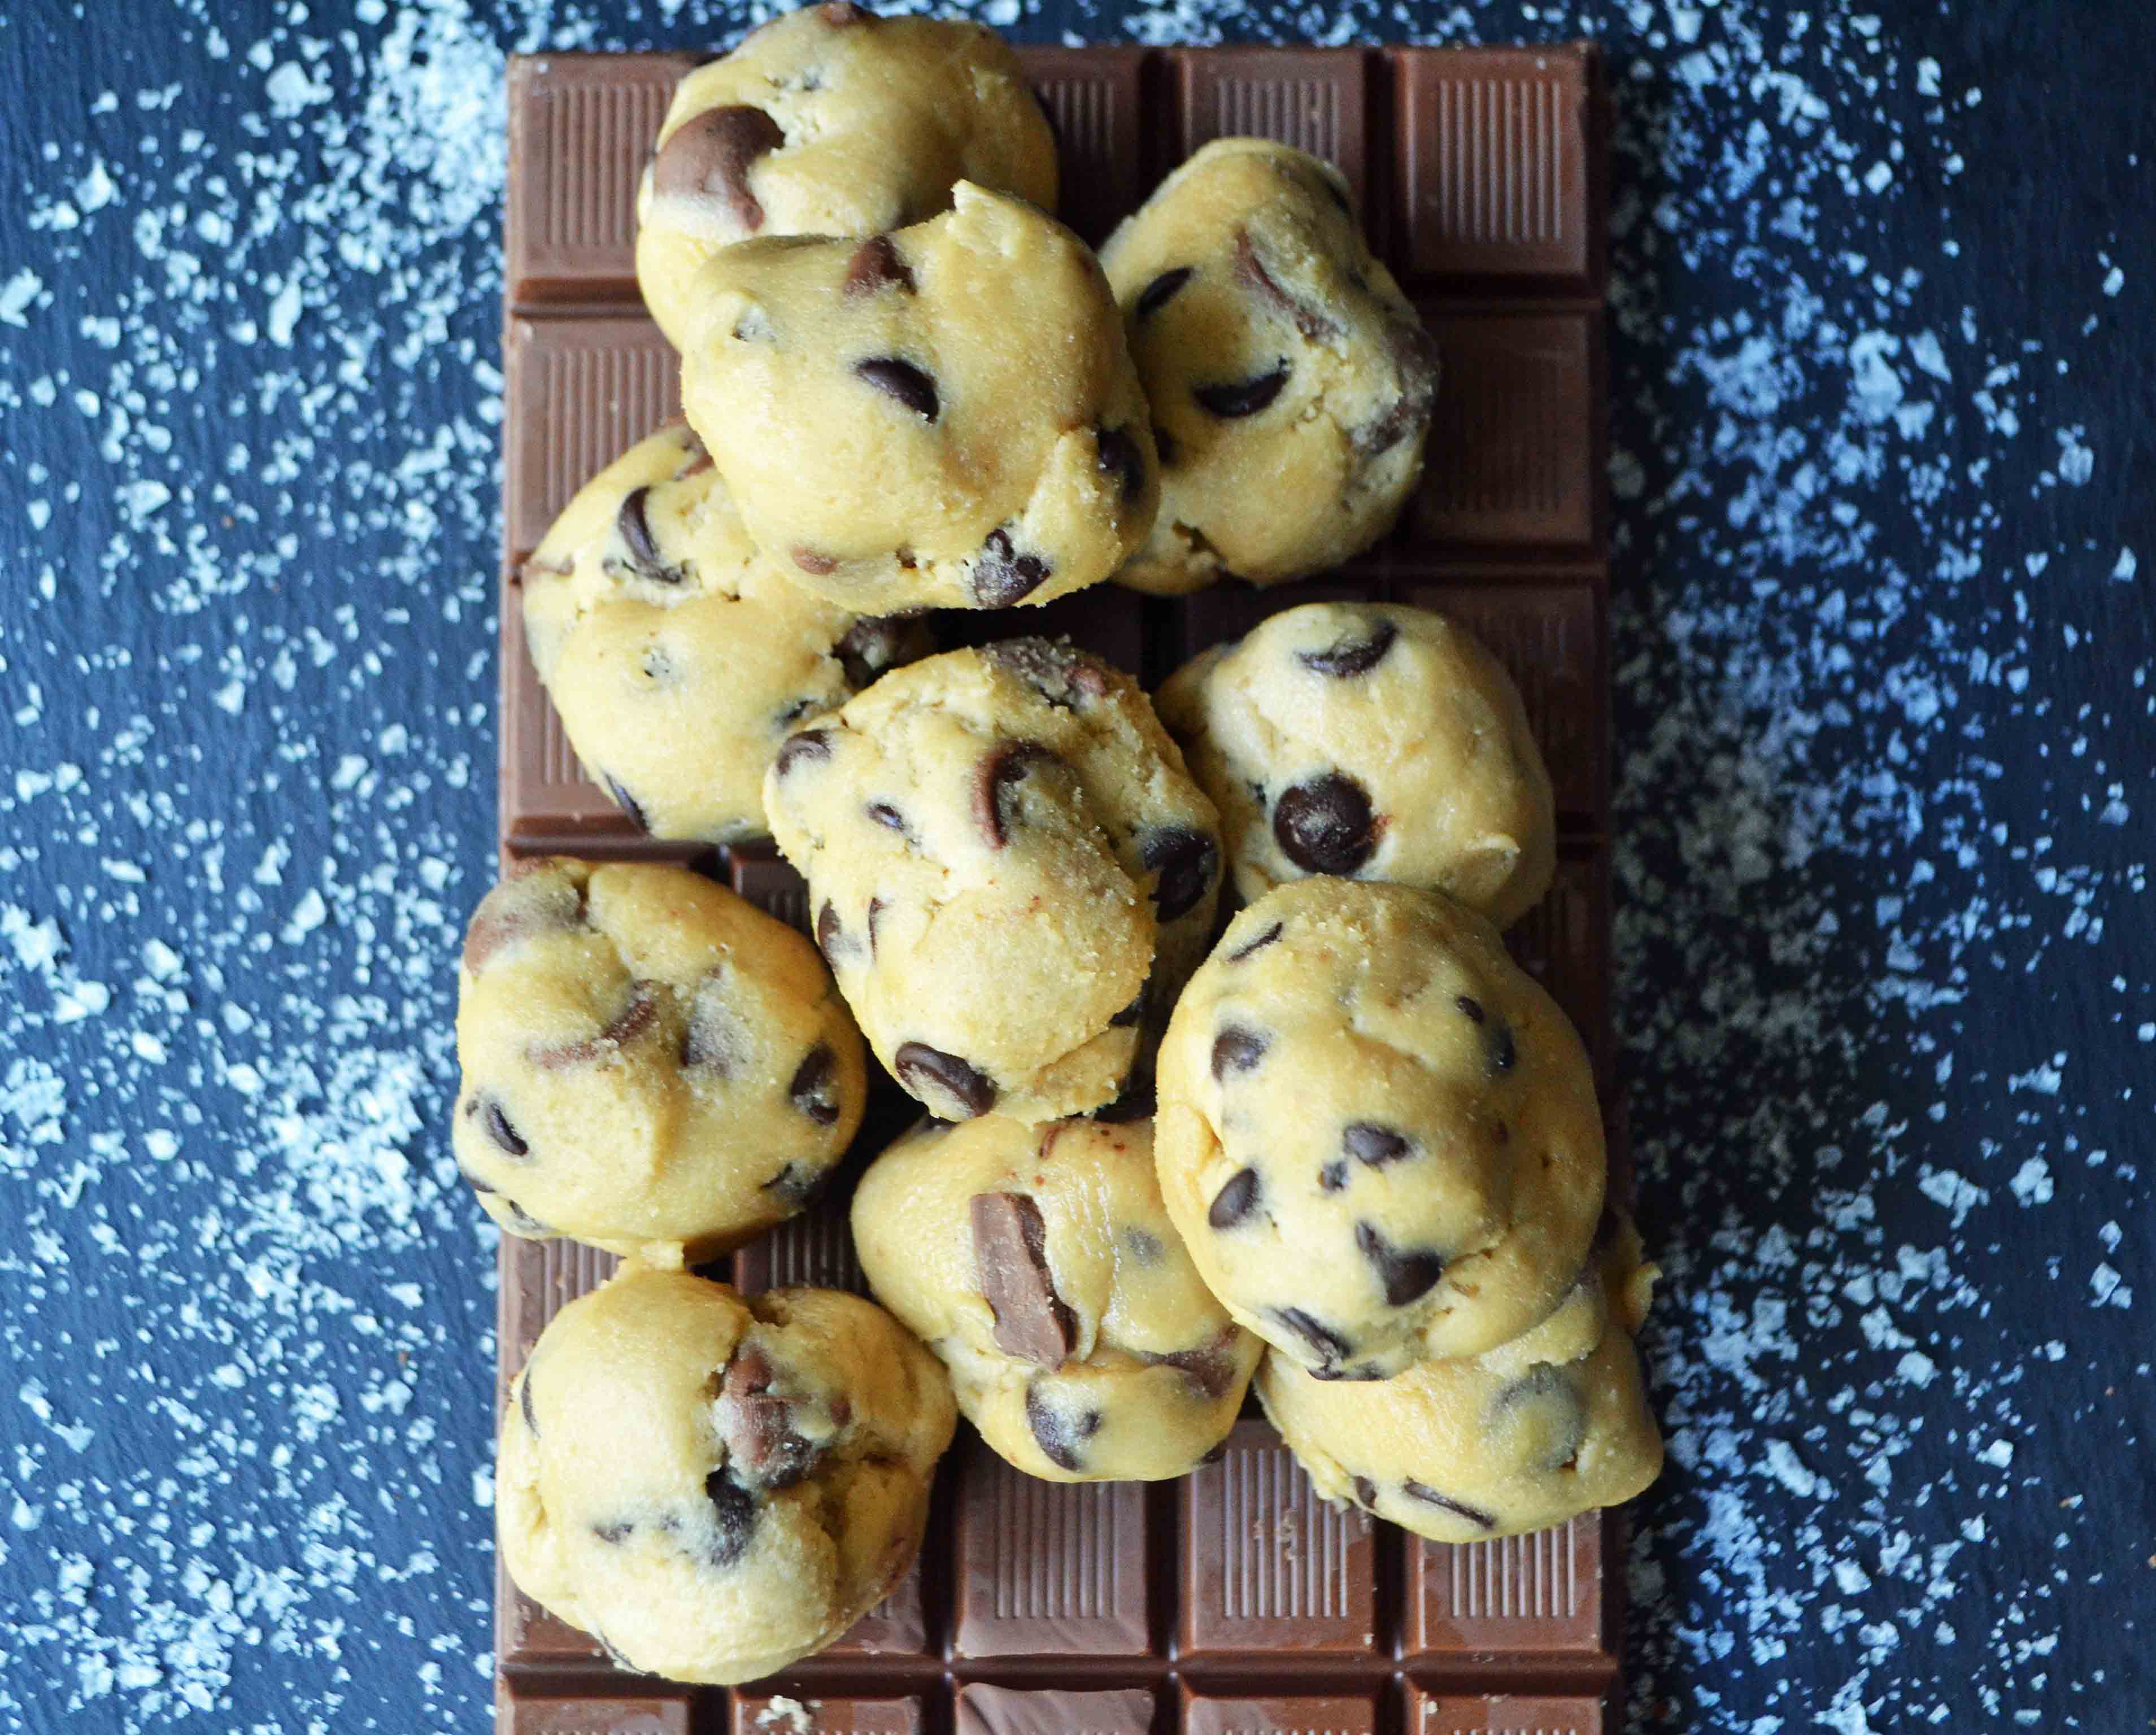 Ultimate Chocolate Chip Cookies